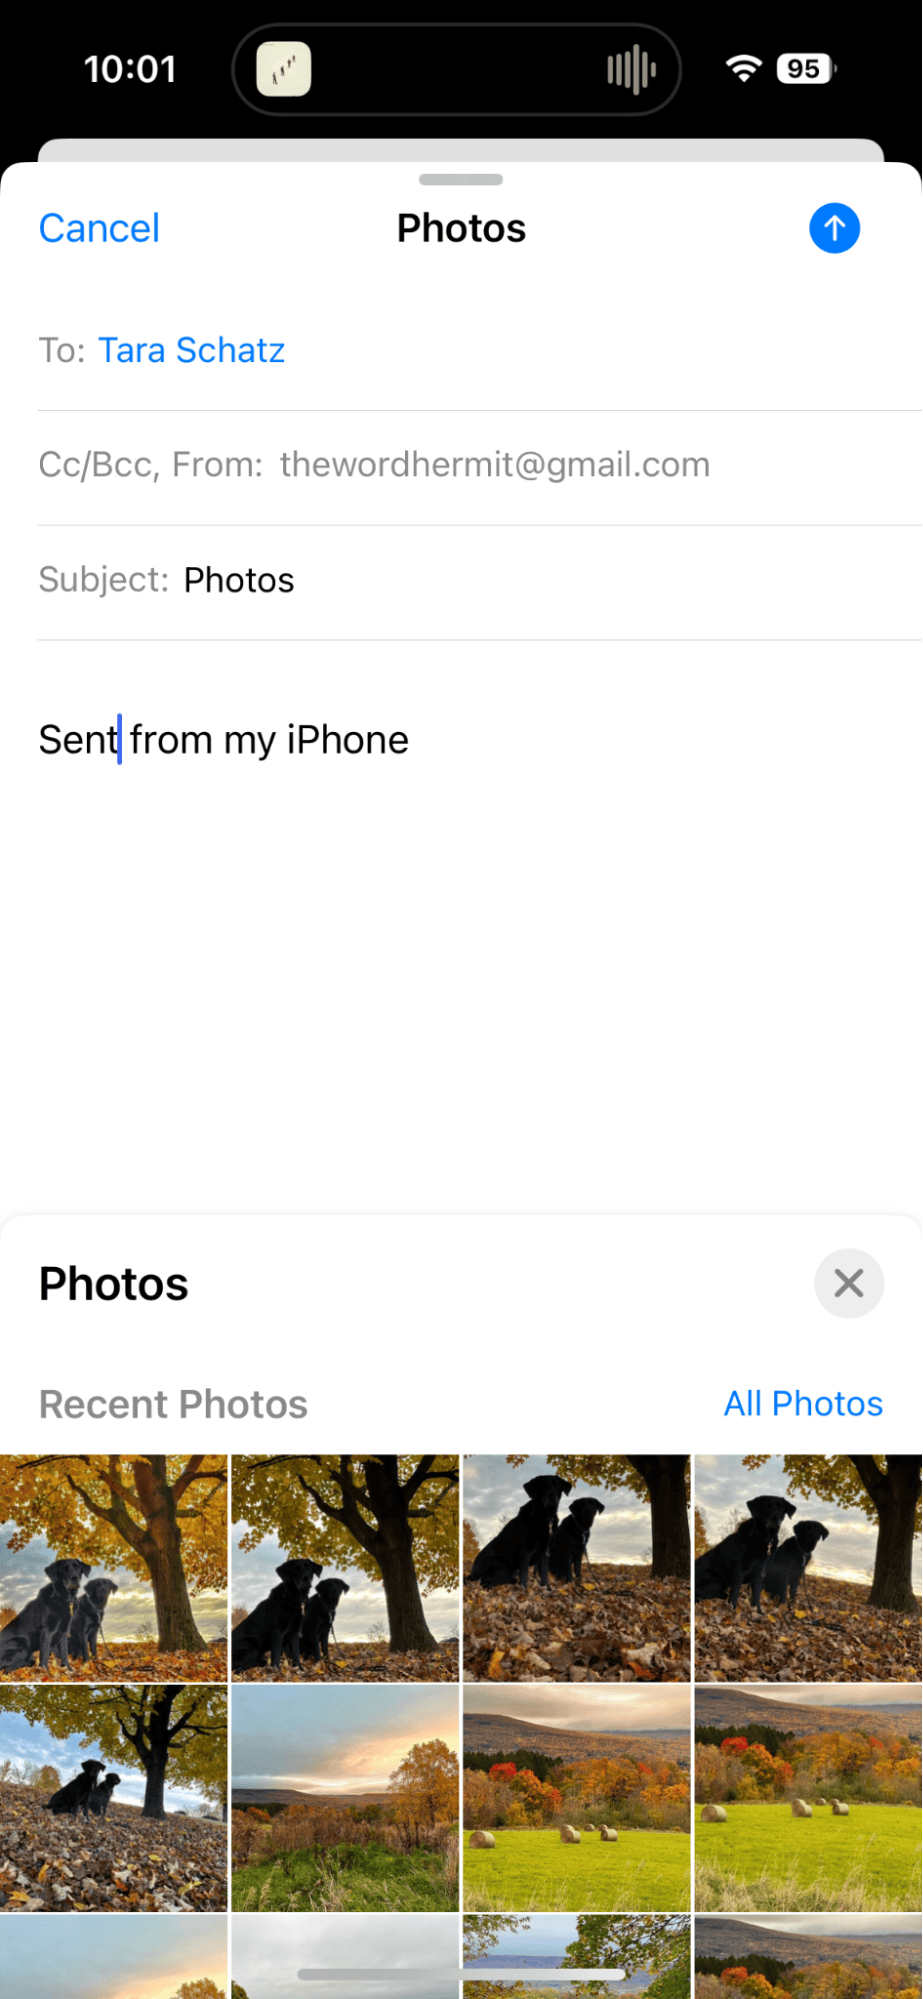 How to attach a photo to email on iPhone: the Mail app